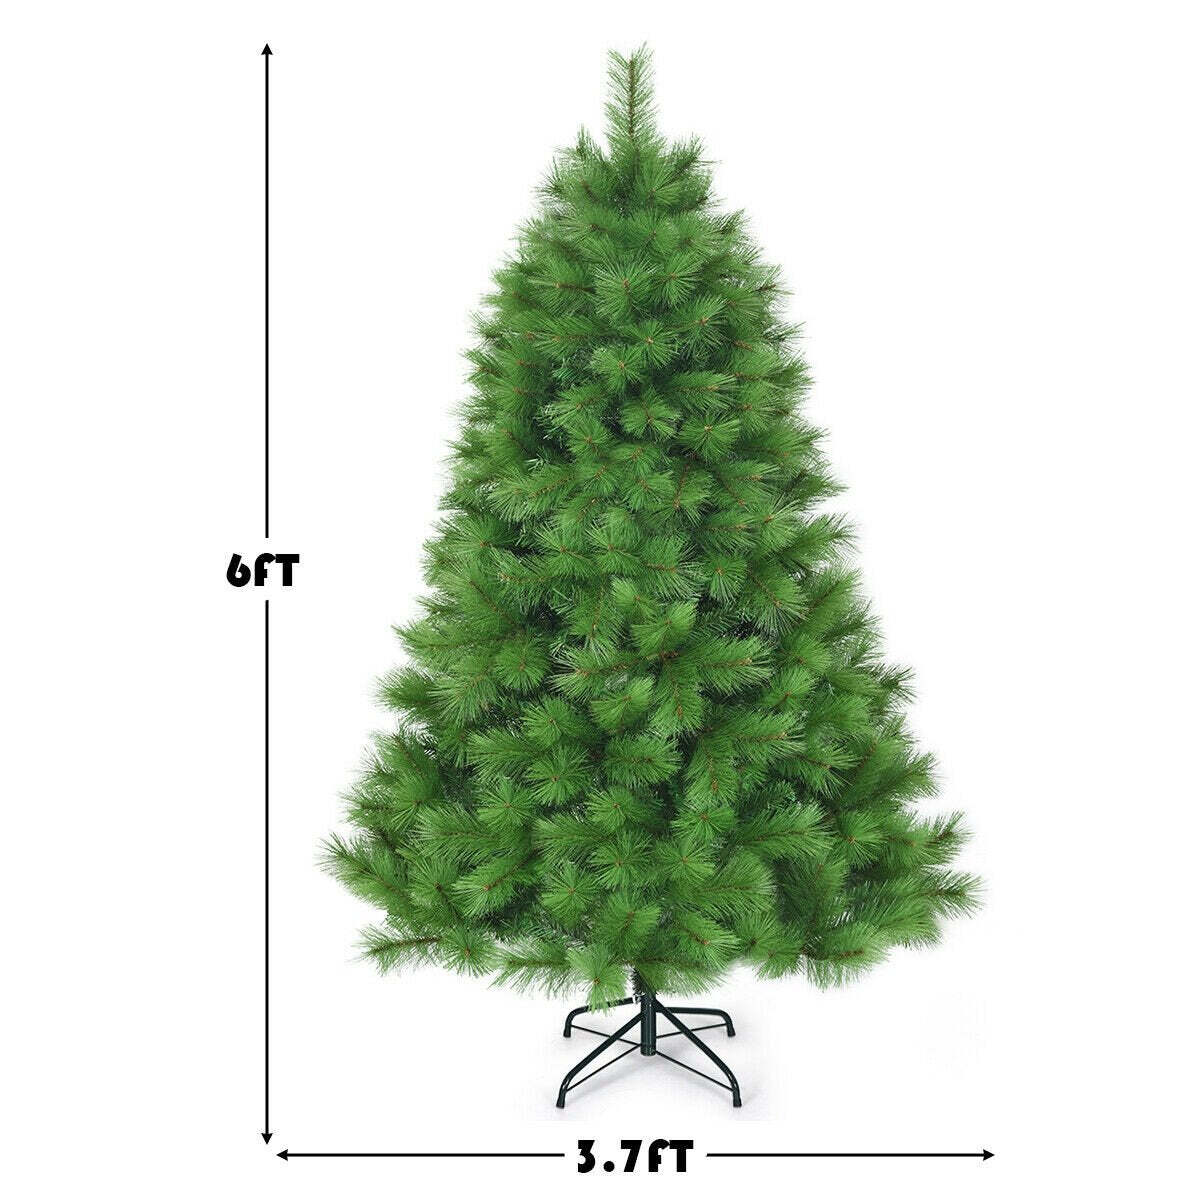 6 ft Hinged Artificial Christmas Tree Holiday Decoration with Stand